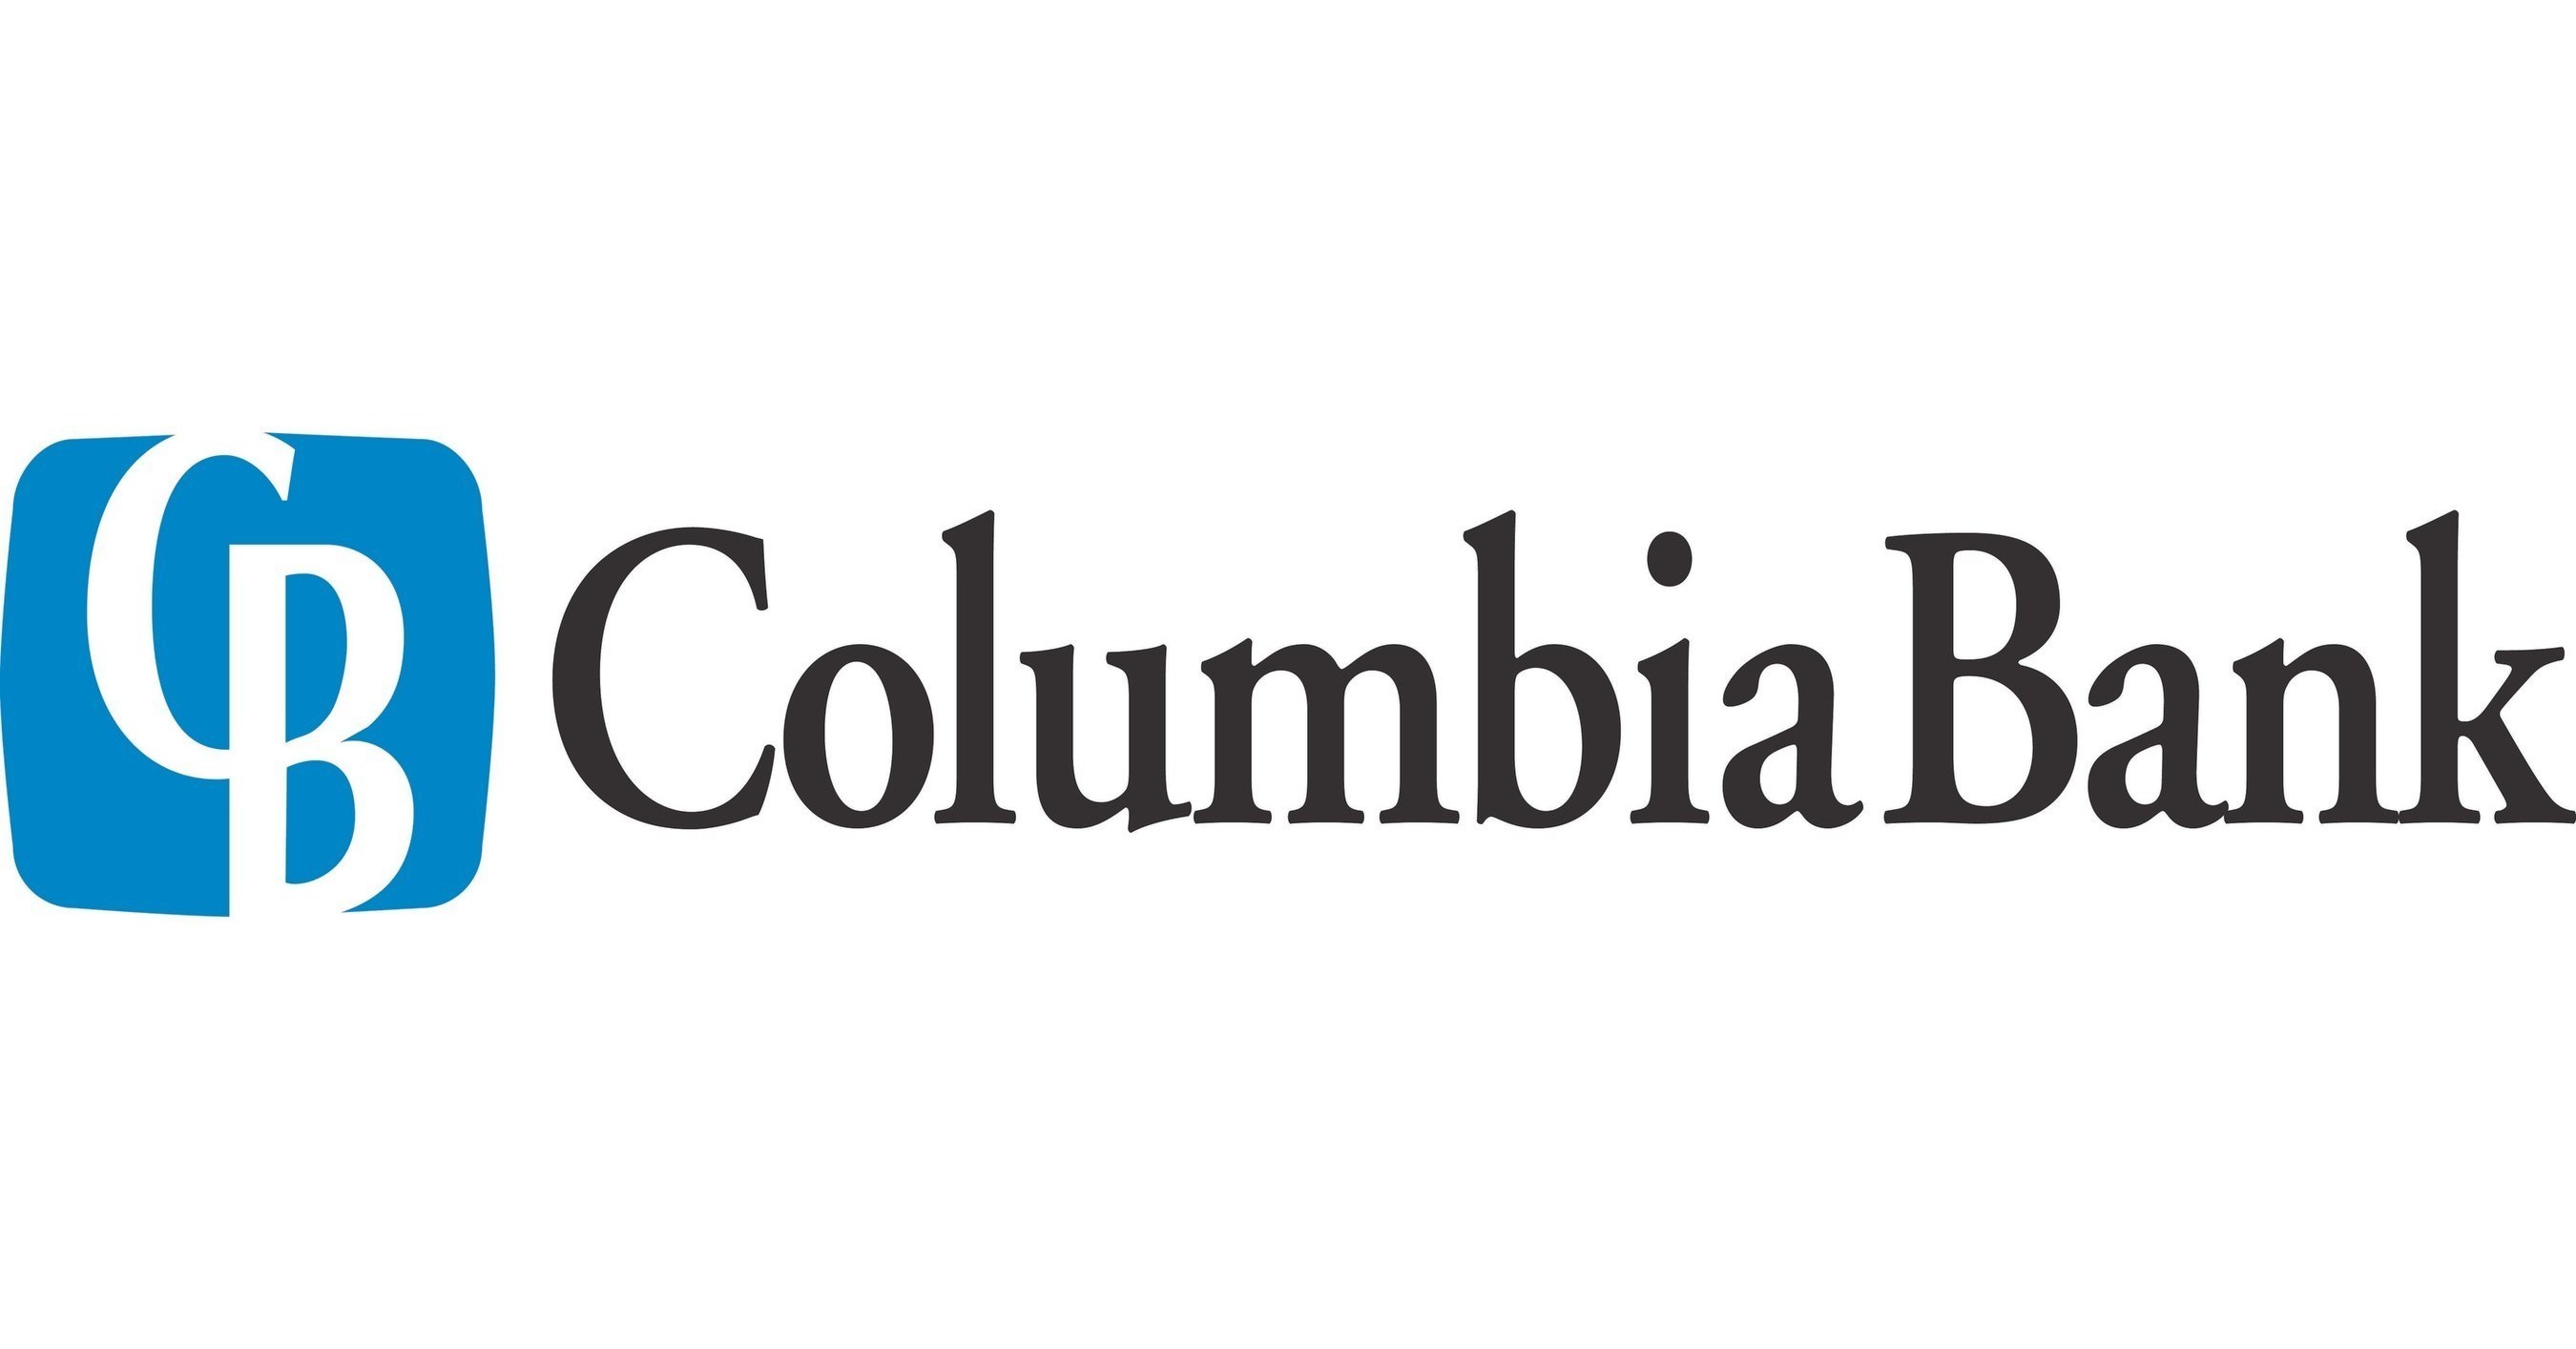 COLUMBIA BANK NAMED TOP SBA LENDER IN SEATTLE AND PORTLAND REGIONS, RANKED TOP 20 NATIONALLY